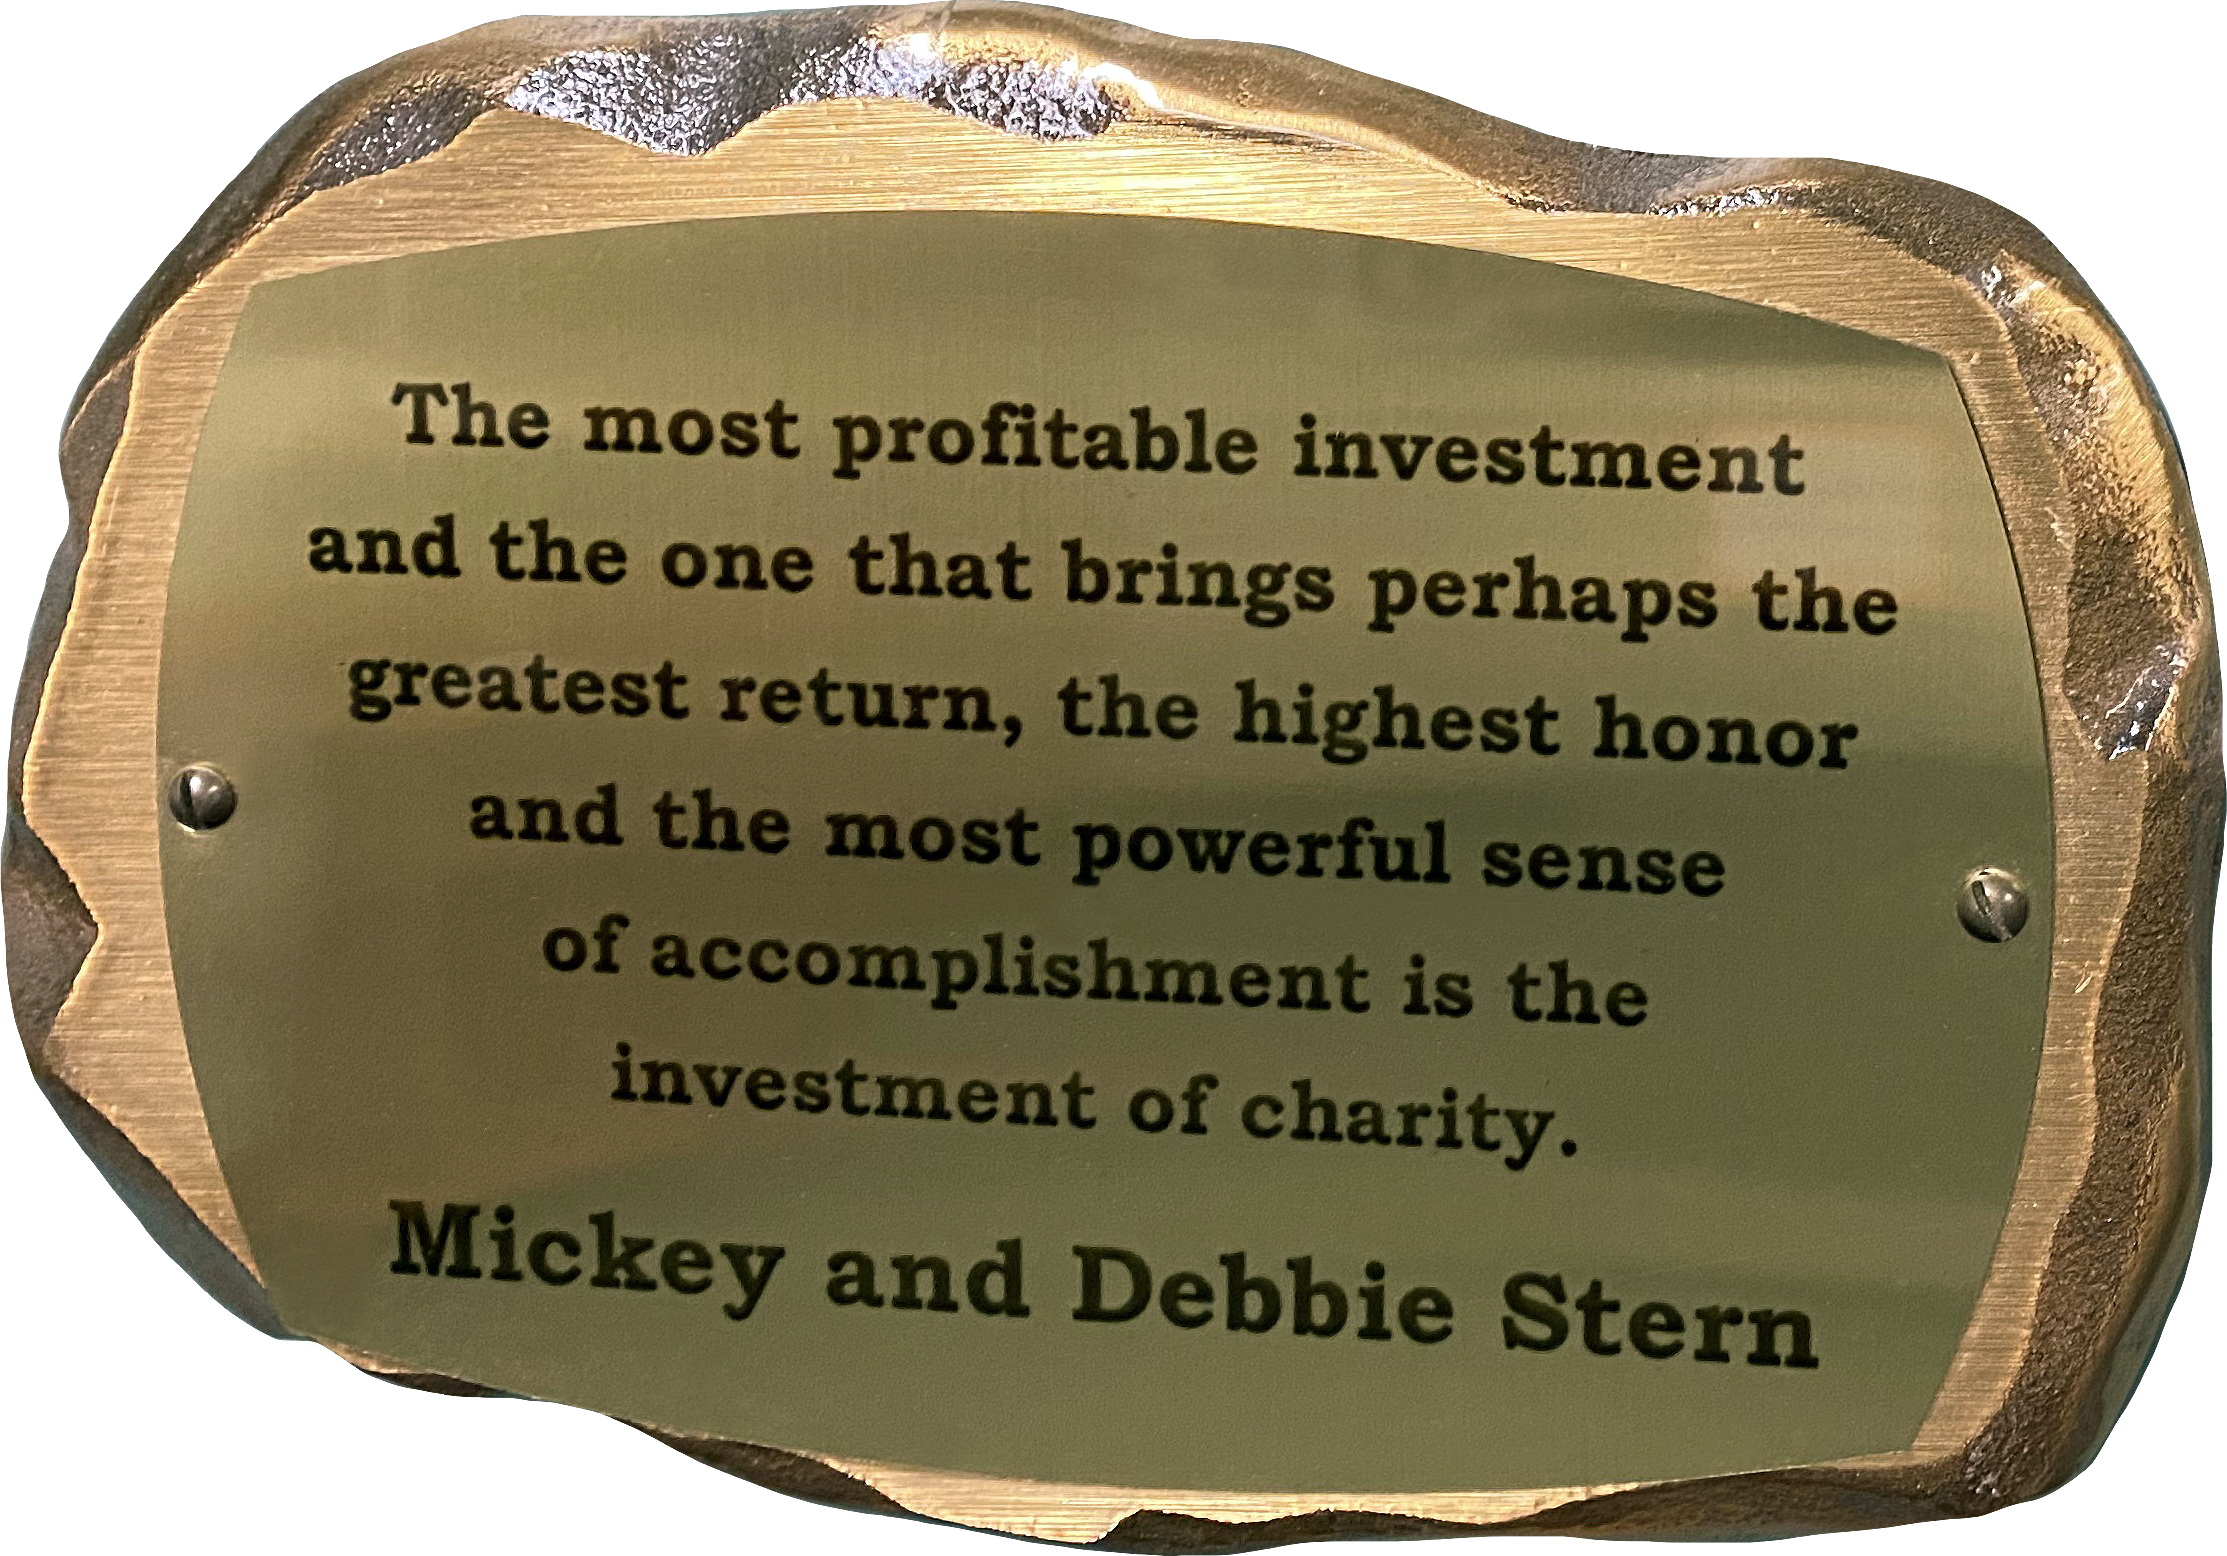 Inscribed bronze plaque in the shape of a rock with text on it reading: The most profitable investment and the one that brings perhaps the greatest return, the highest honor and the most powerful sense of accomplishment is the investment of charity. Micky and Debbie Stern. 